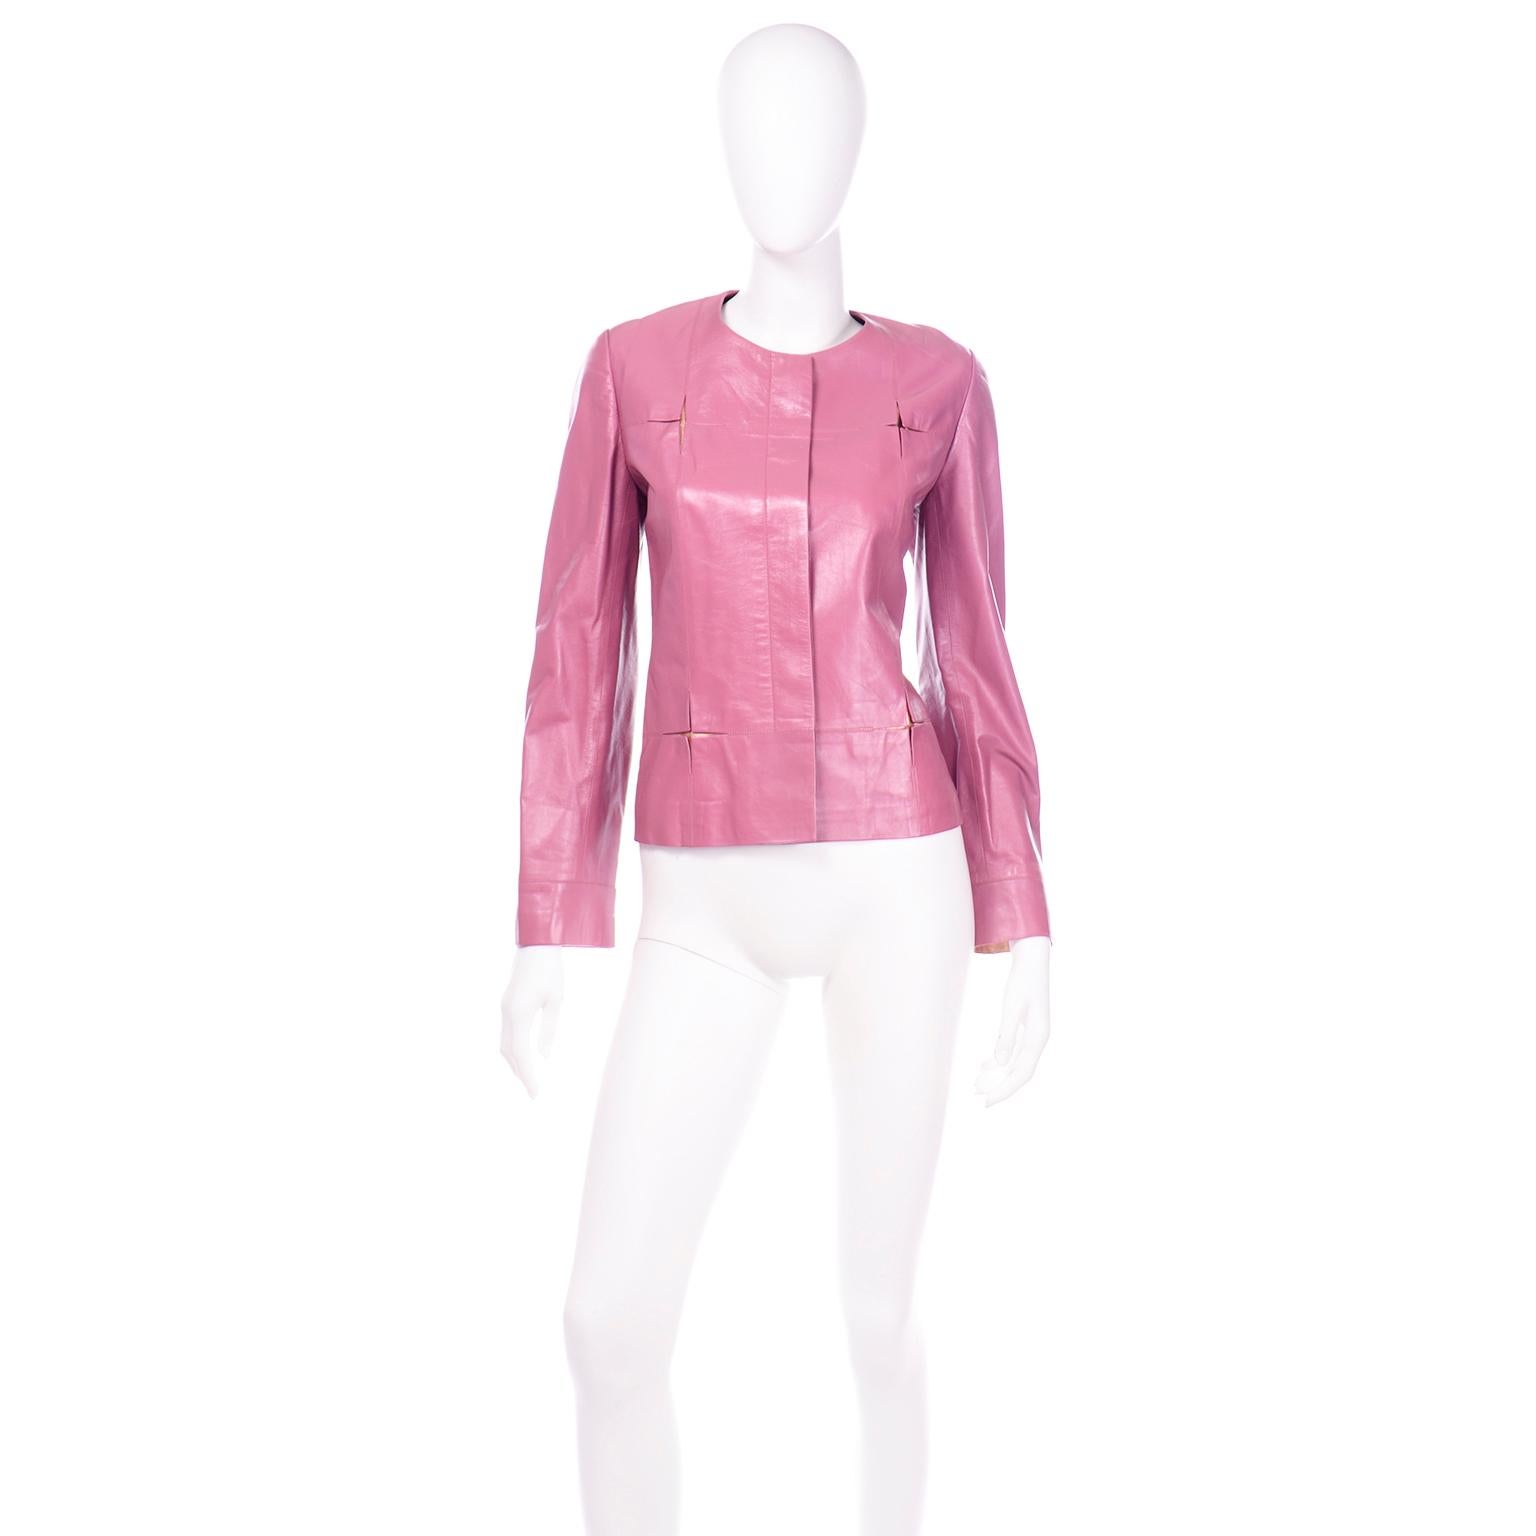 This berry pink leather Chanel jacket is in a soft lambskin leather and it has pops of rose gold in fun square star cutouts. This unique detail is found along the front of the jacket and on the cuffs of the sleeves. This jacket is collarless and has